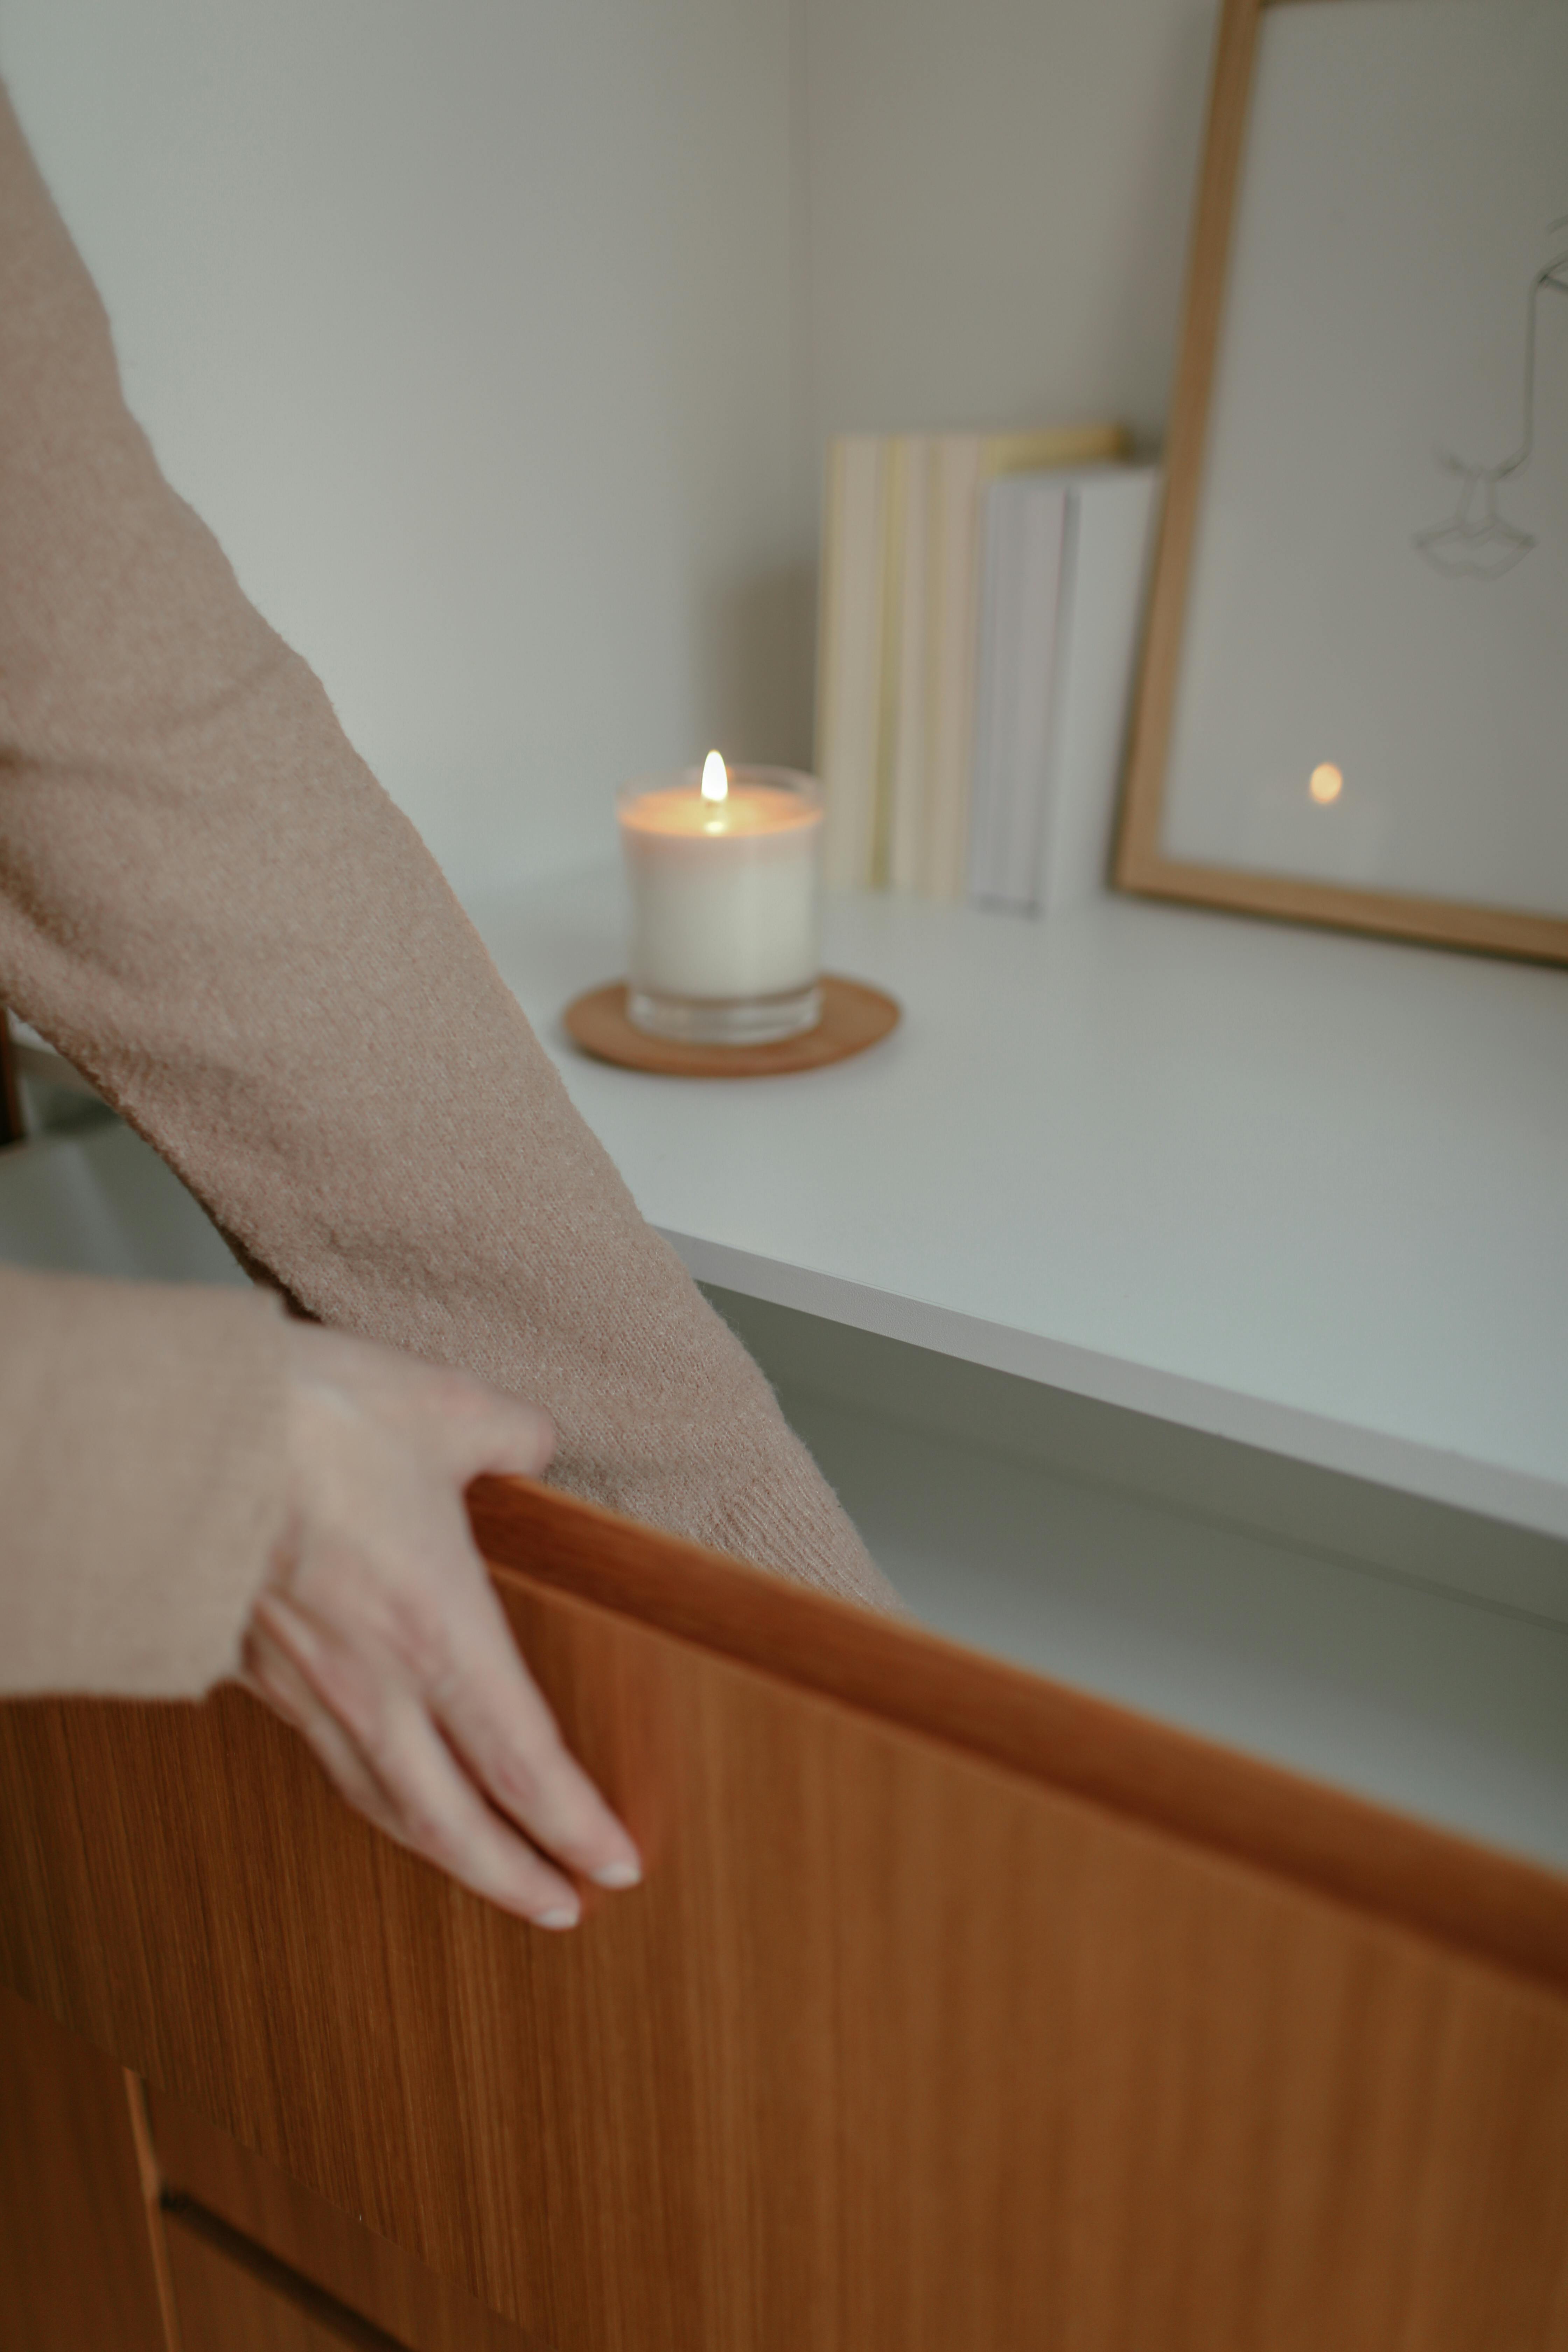 A woman reaching into a drawer | Source: Pexels